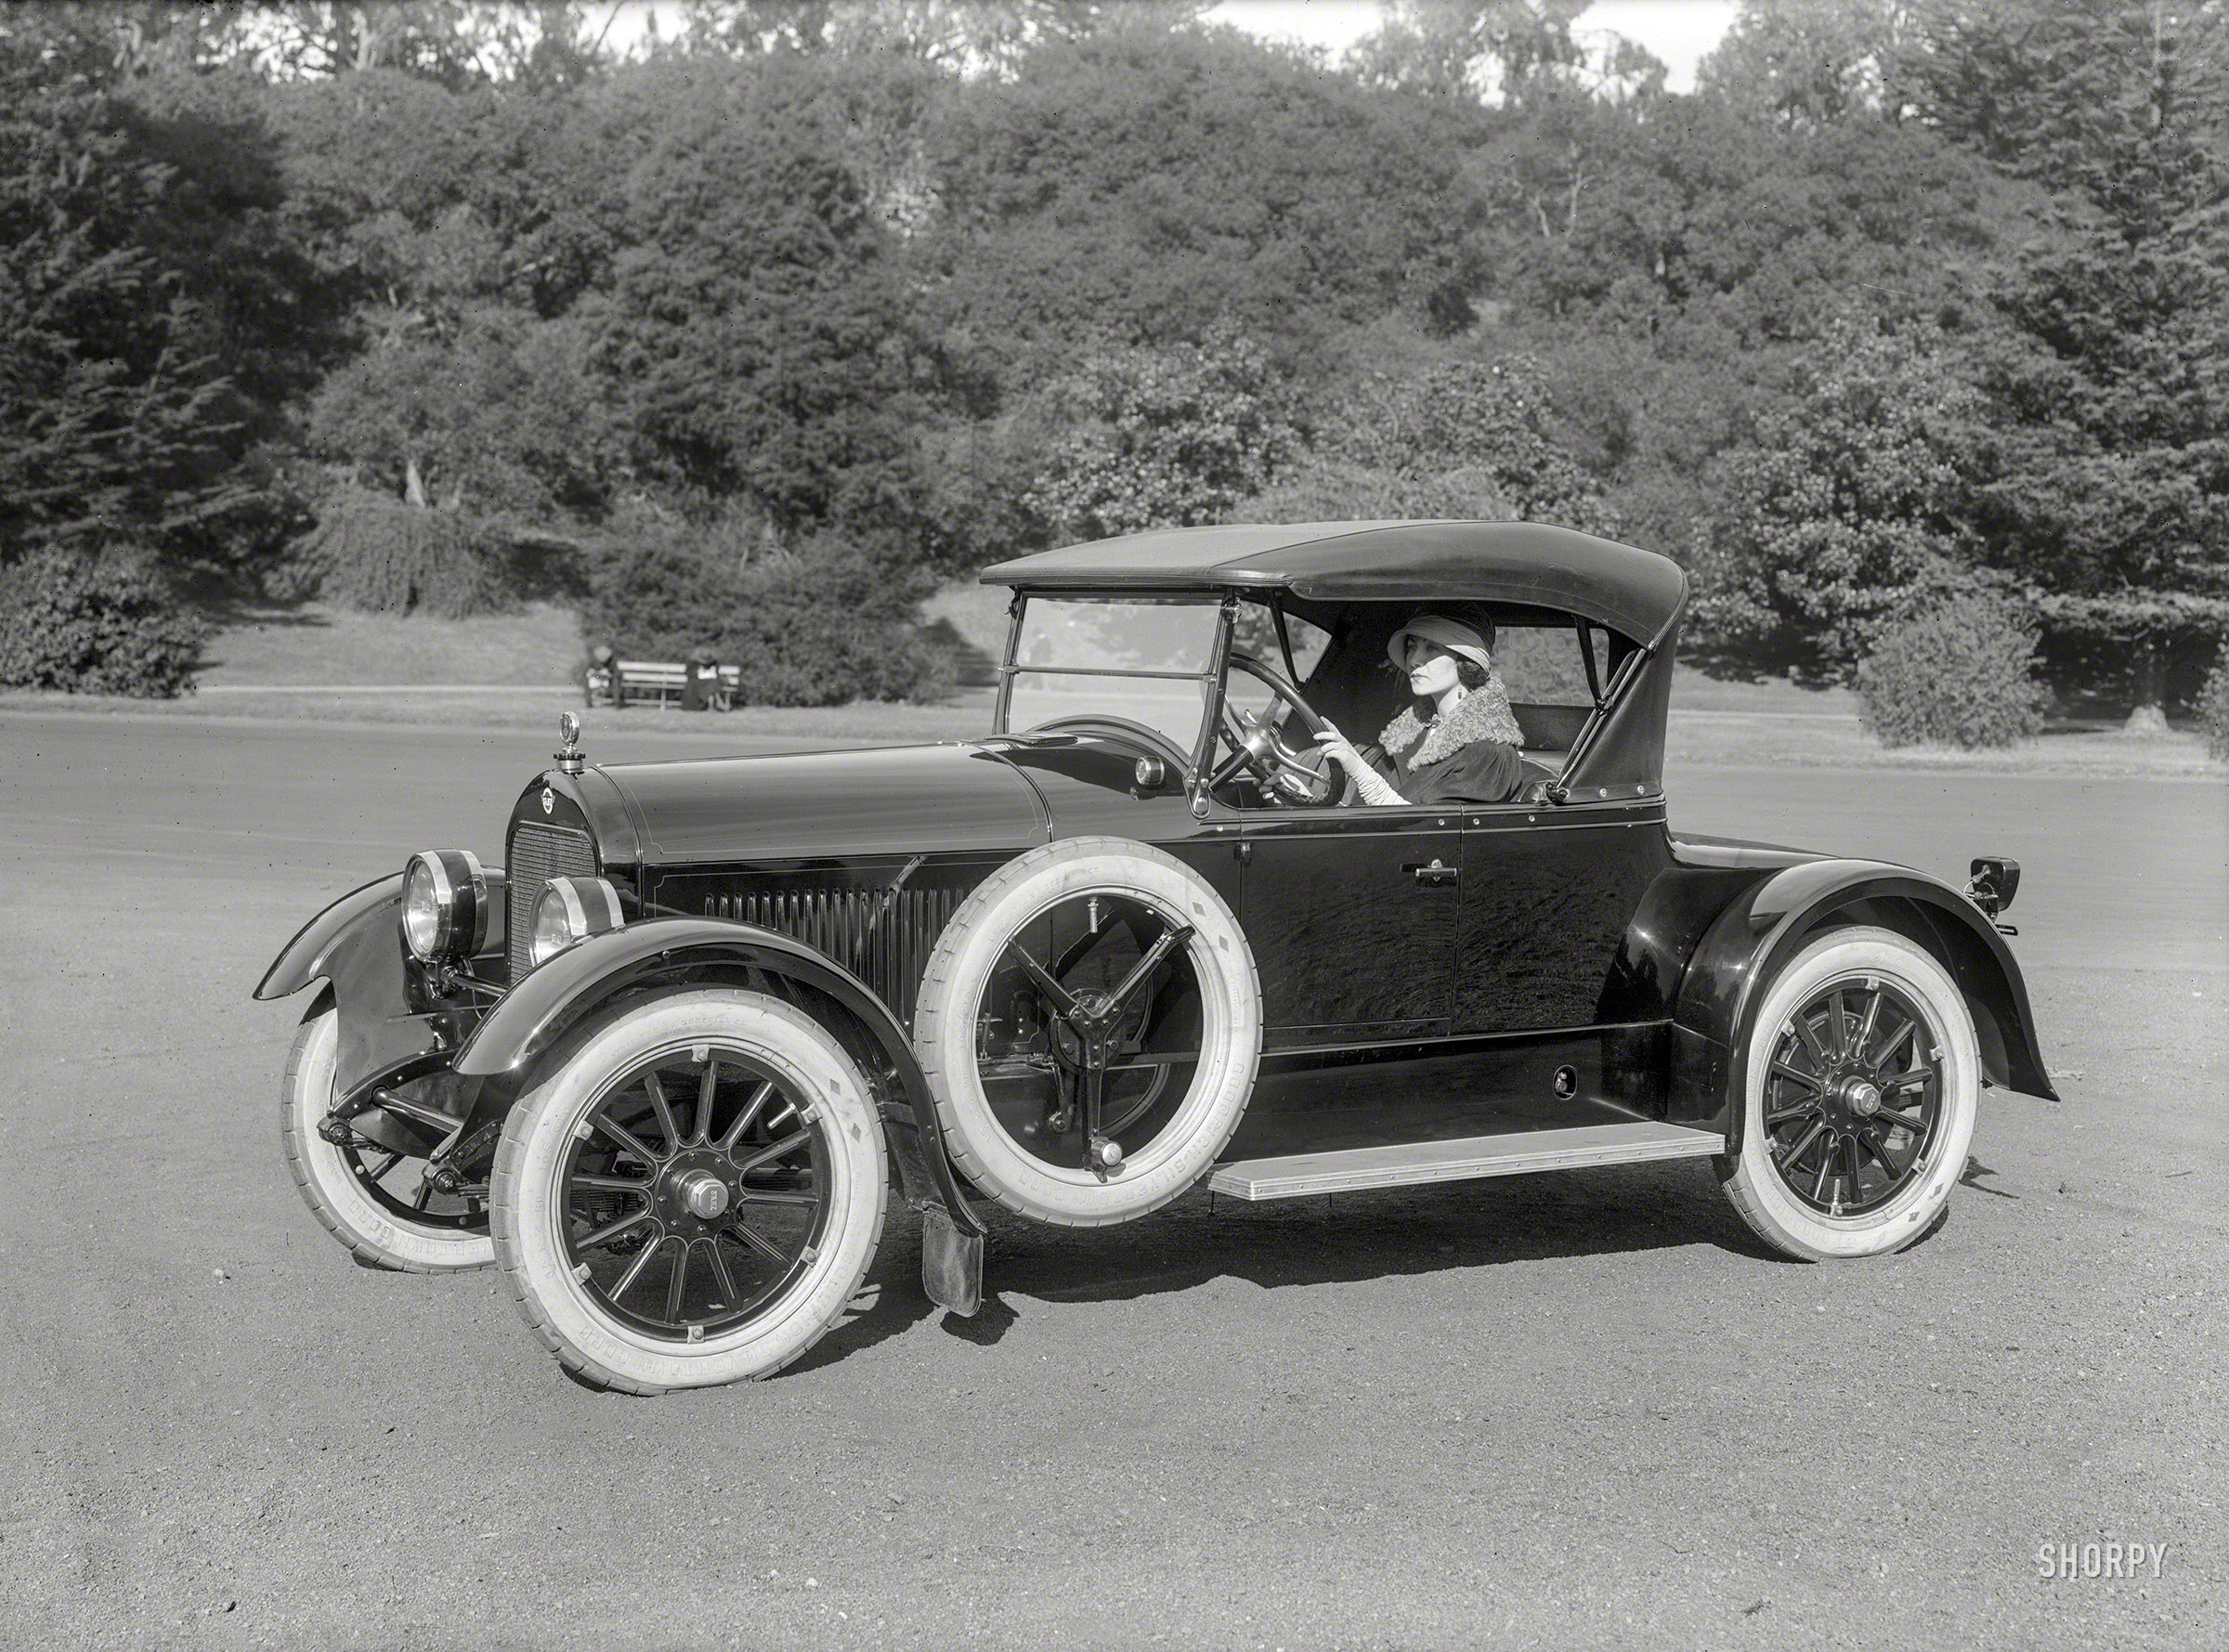 San Francisco circa 1923. "Stutz roadster at Golden Gate Park." Piloted by the lady last seen here. 5x7 glass negative by Christopher Helin. View full size.